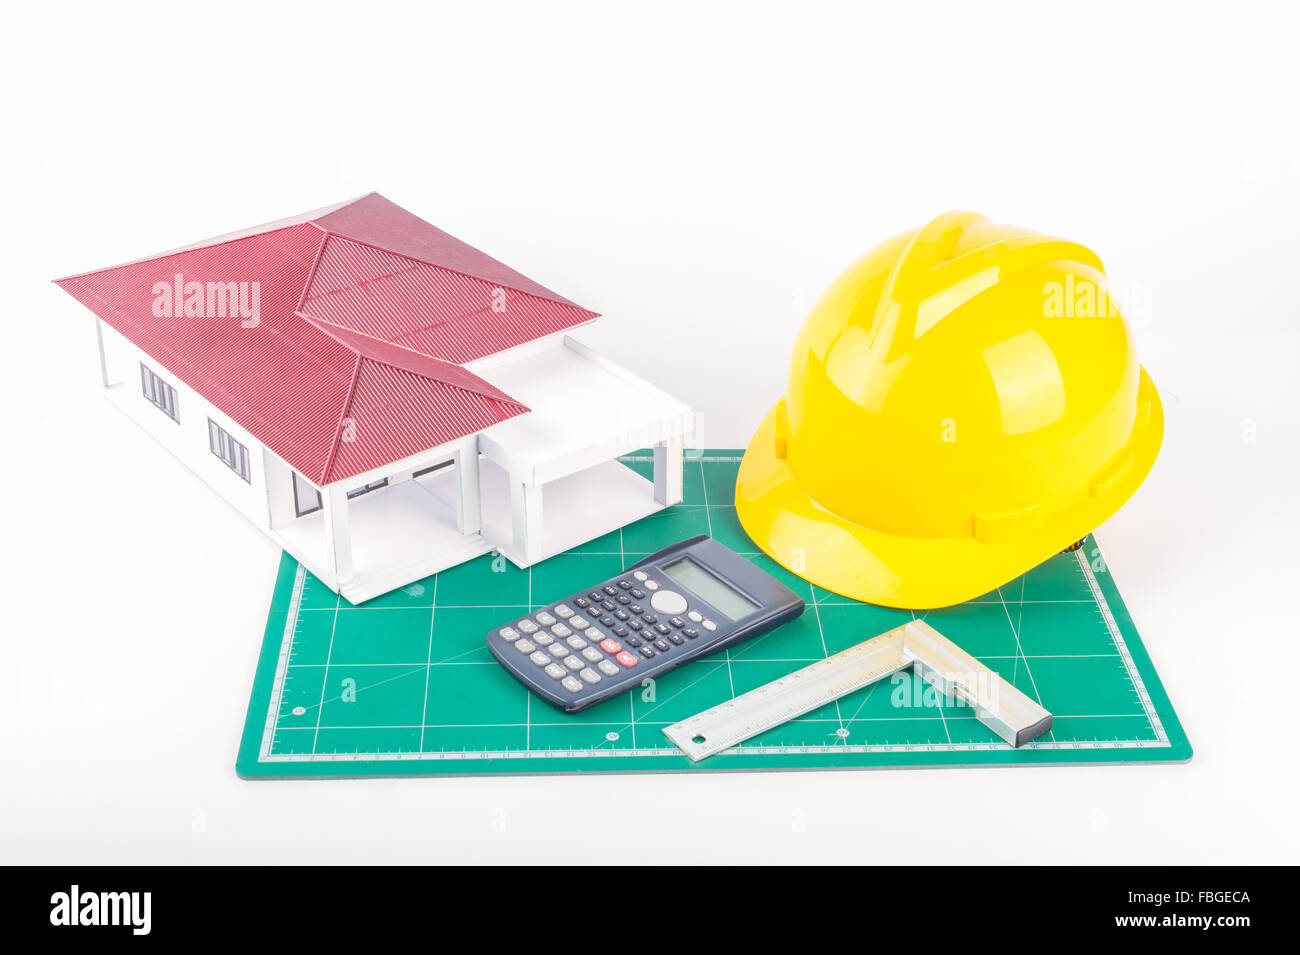 Model of the house and  calculator, Plastic right angle on white background Stock Photo